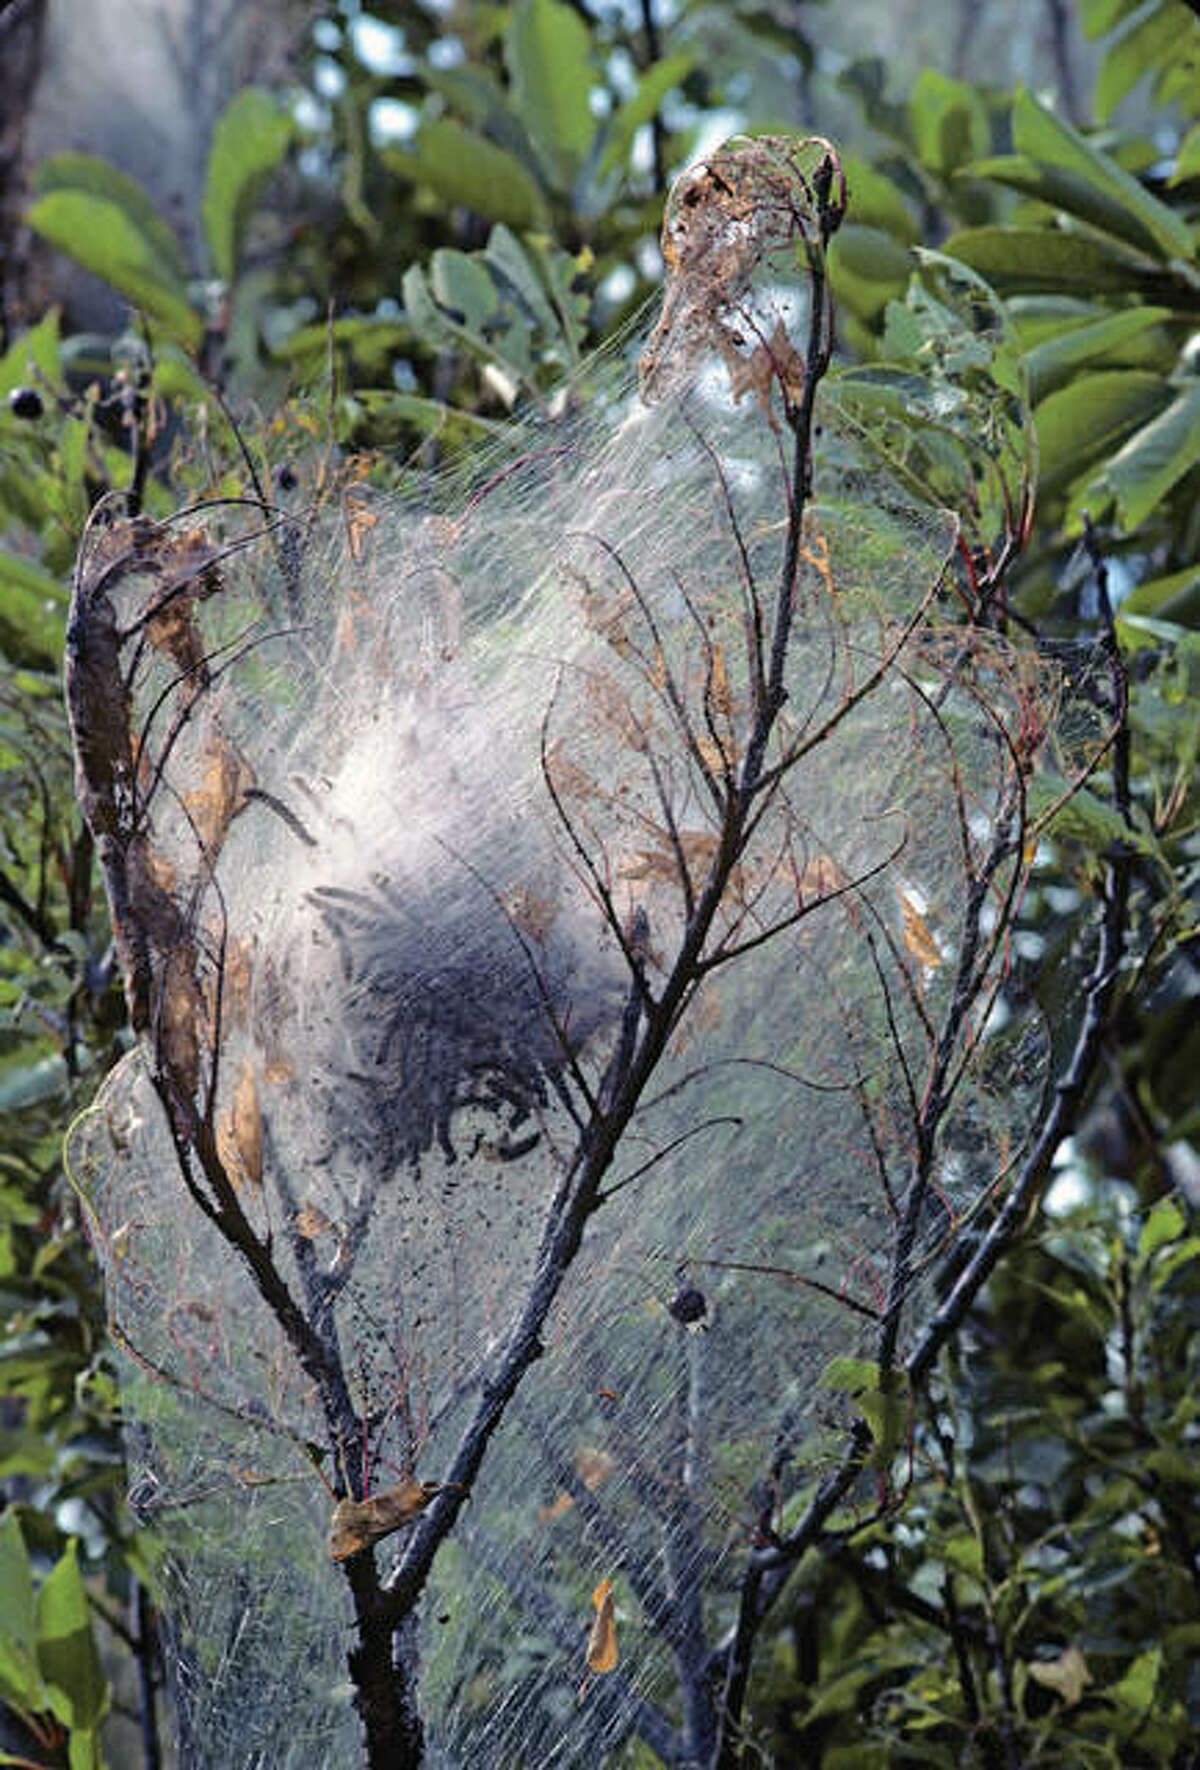 Fall webworm tent caterpillars on a cherry tree. Wild Horizons | Universal Images Group (Getty Images)